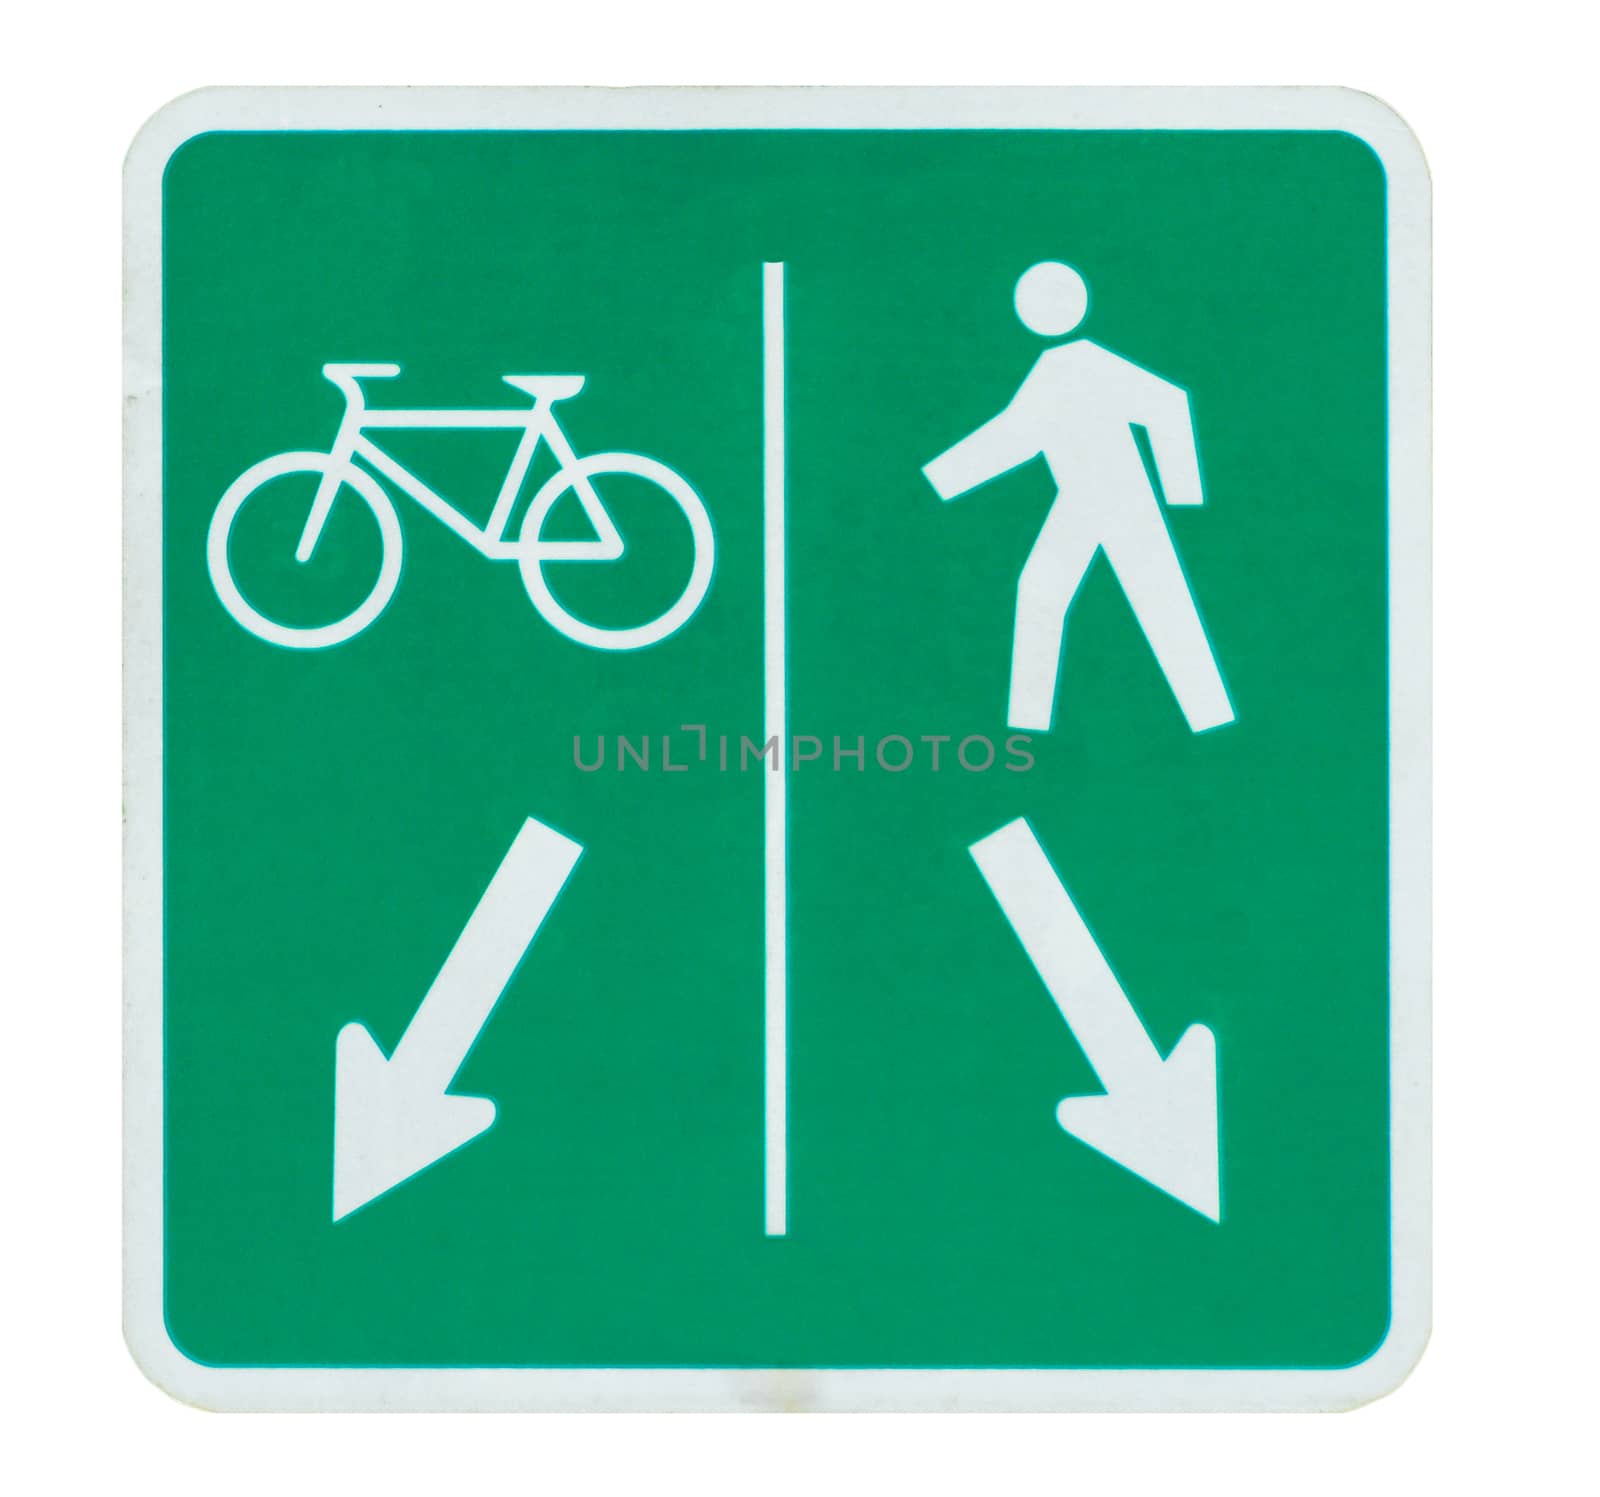 Sign of bicycle and pedestrian shared route isolated on white